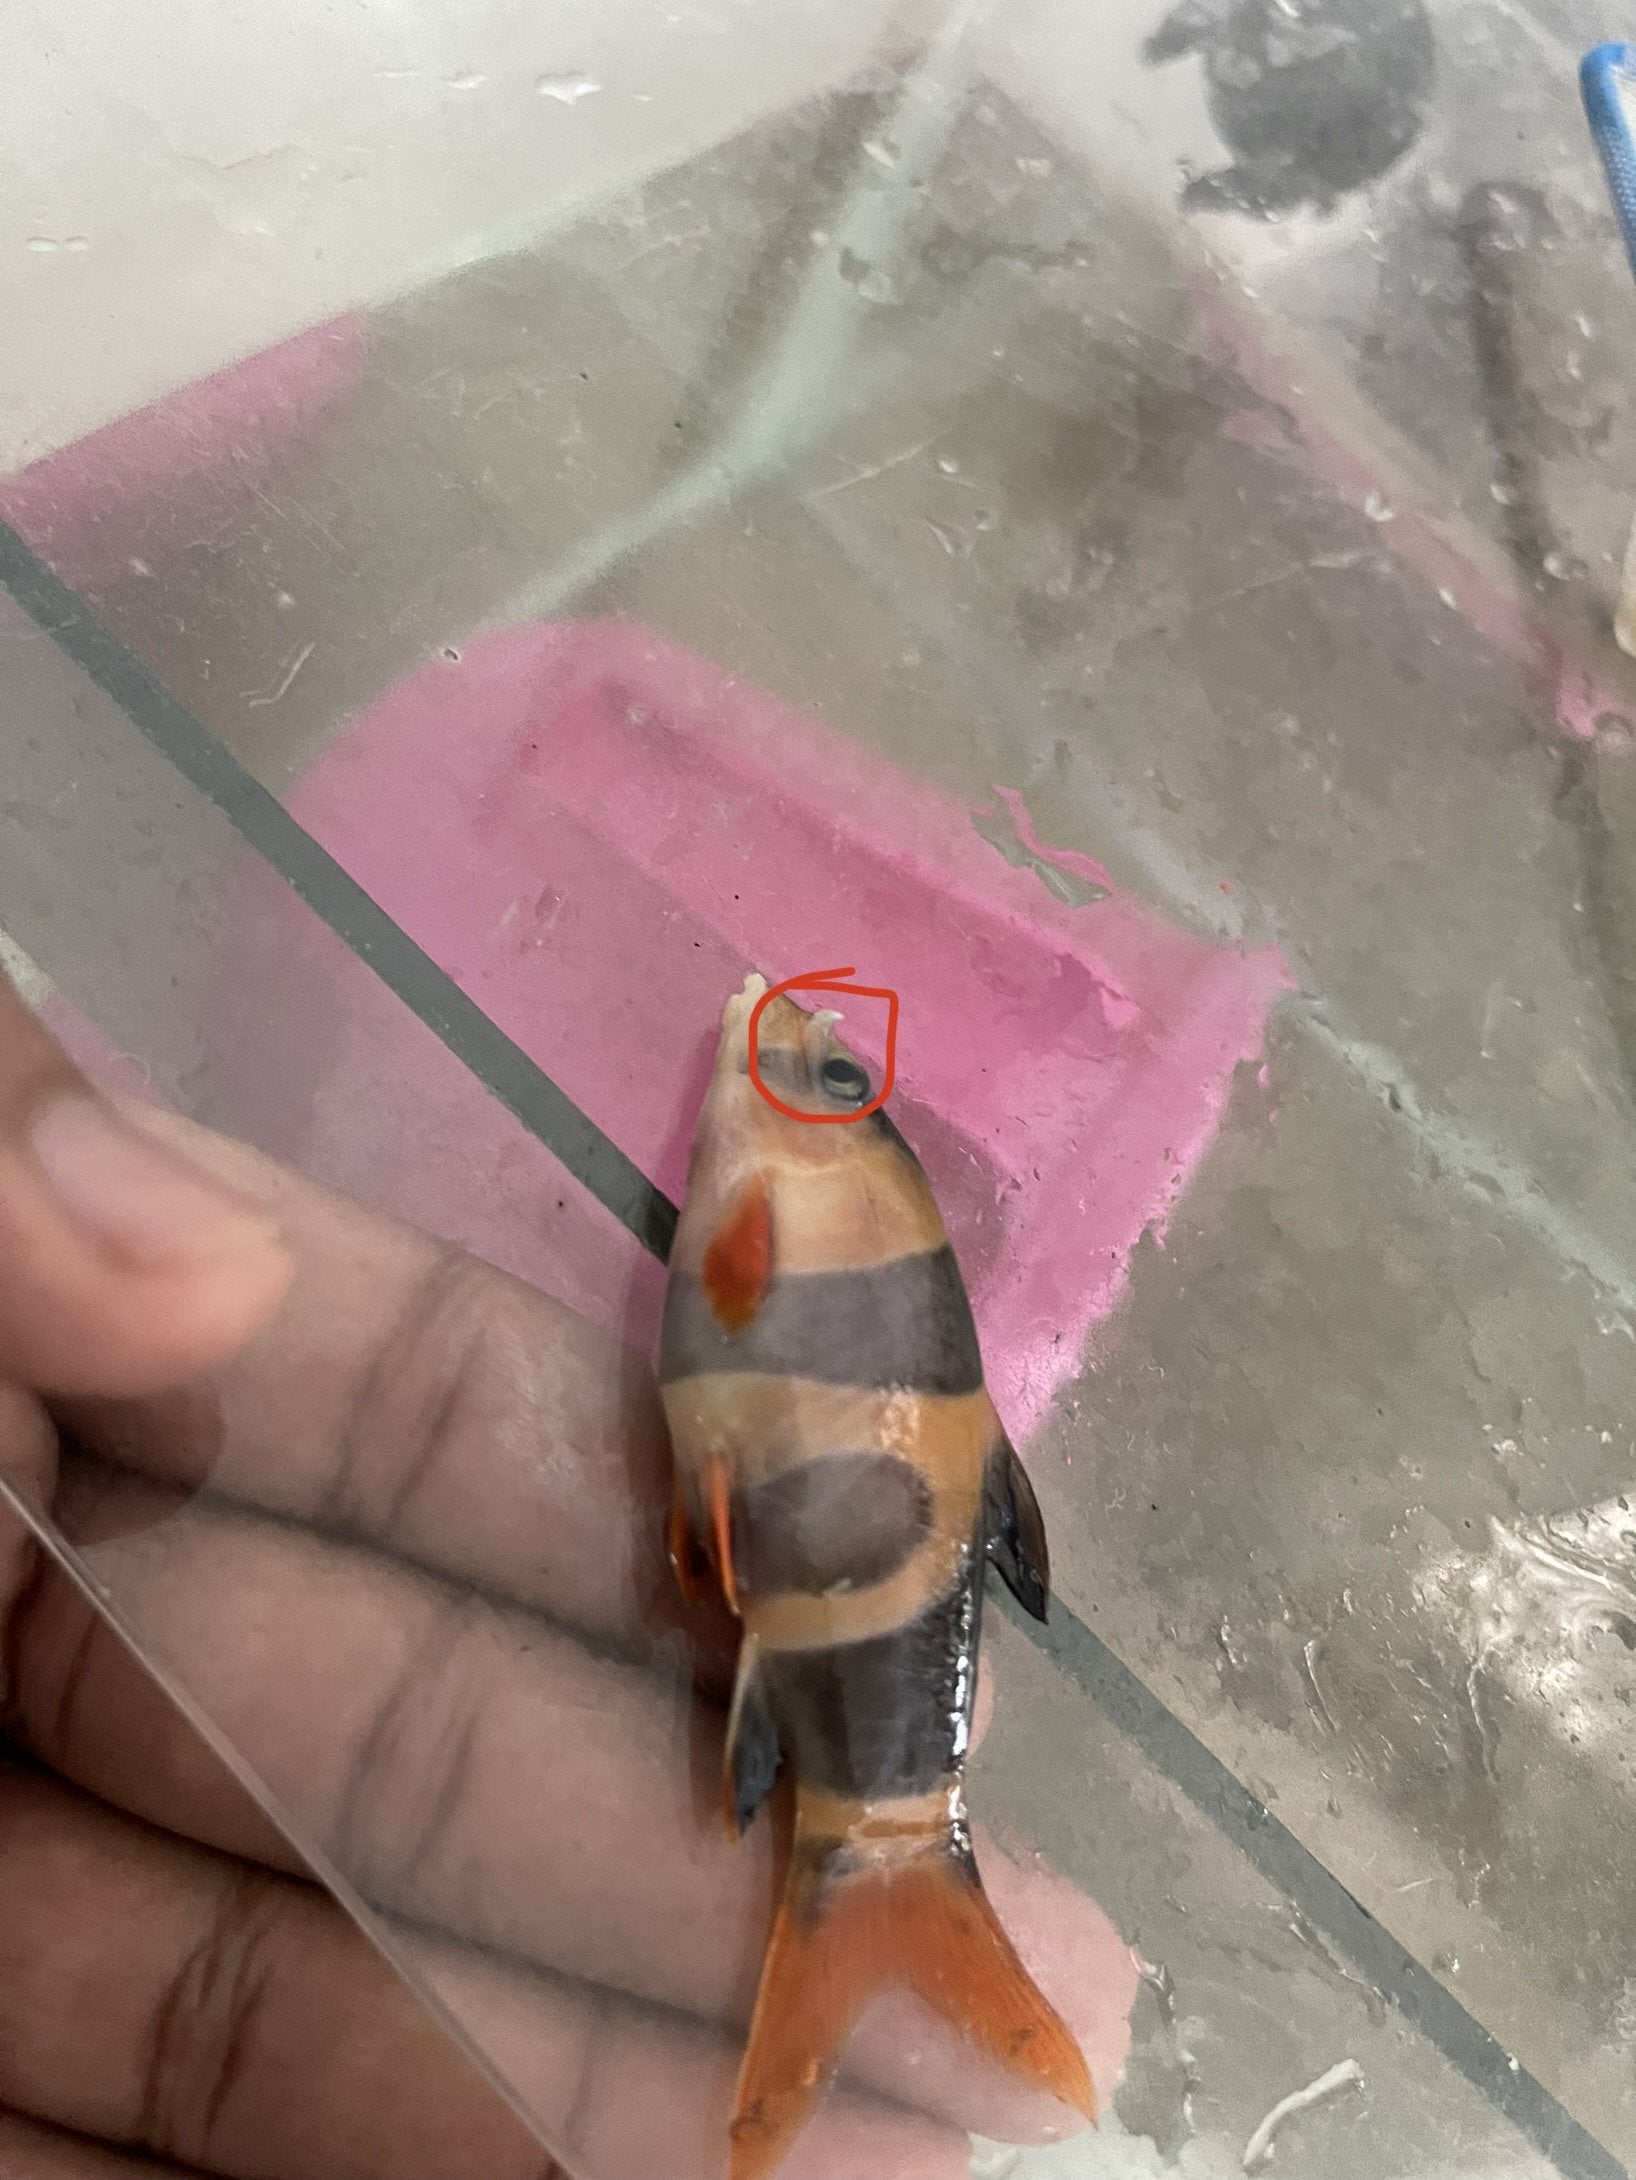 Dead clown loach with something sharp pointing out from side of